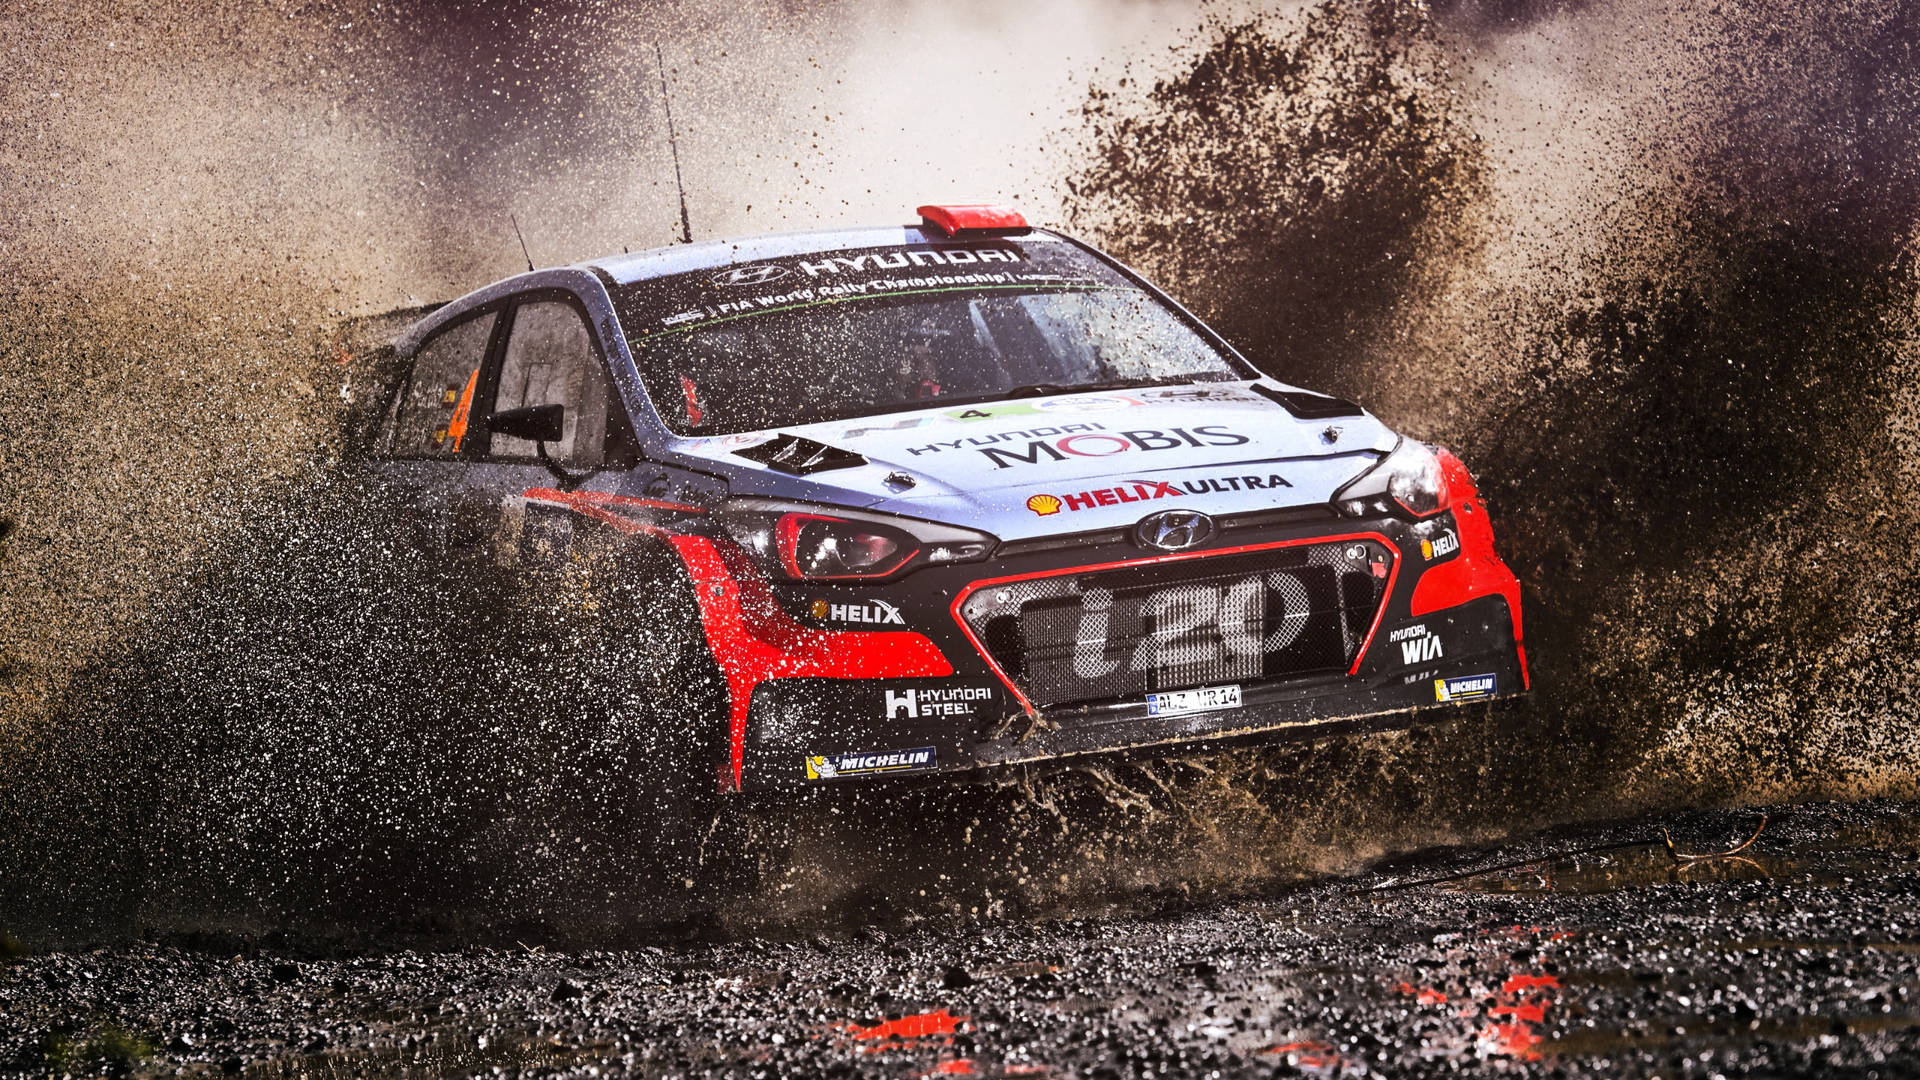 Adrenaline Packed Action - Racing Car Conquering A Muddy Road